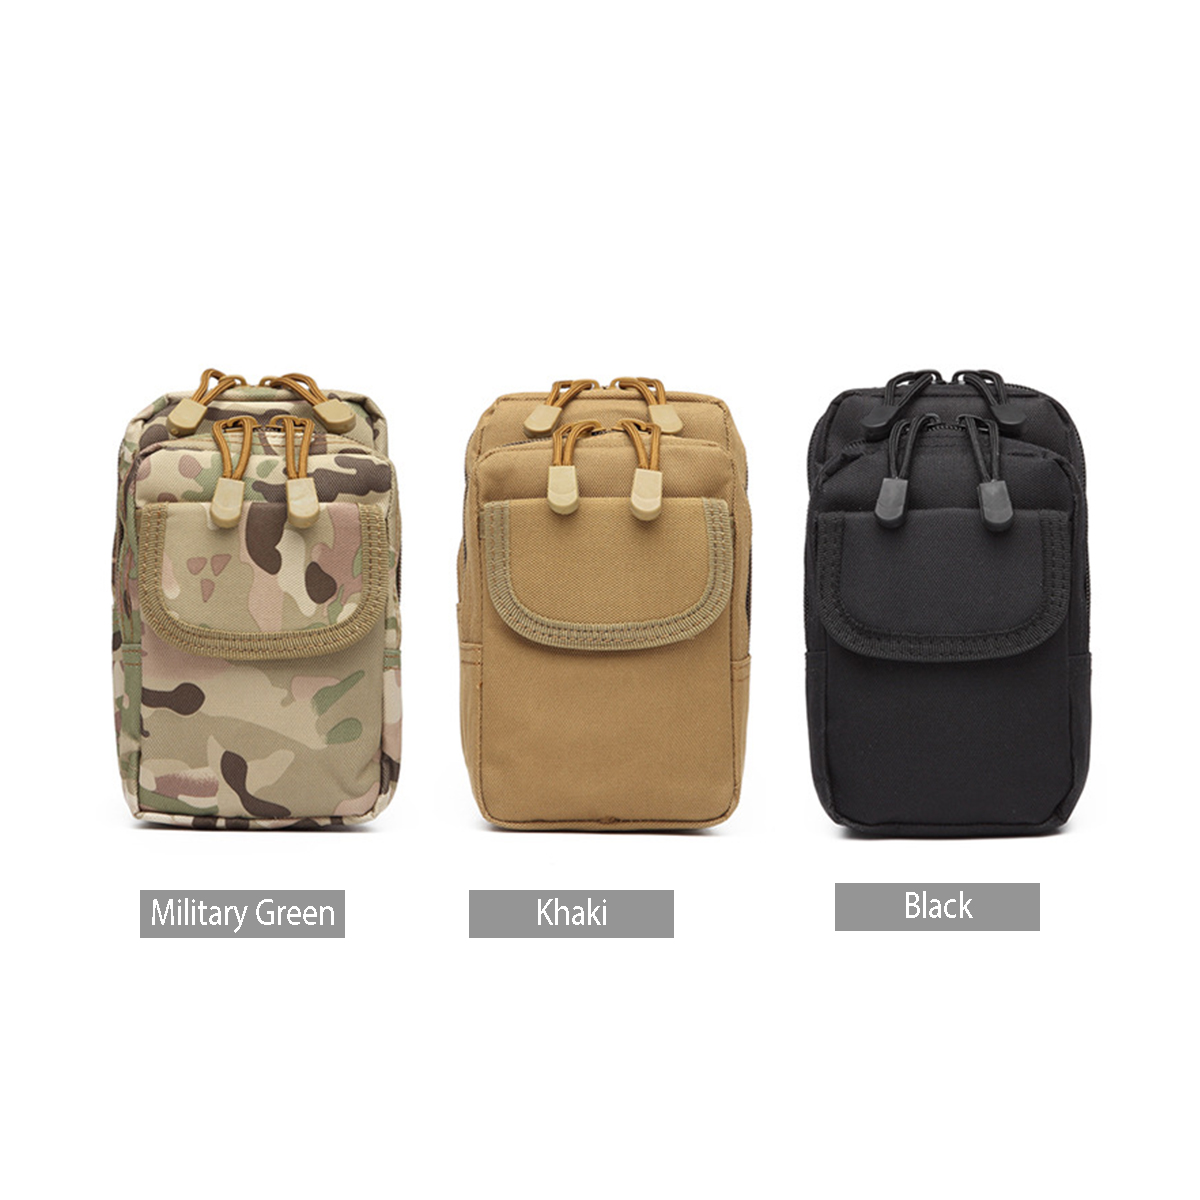 6-Inch-Tactical-Molle-Pouch-Waist-Bag-Phone-Bag-For-Outdoor-Sports-Hiking-Climbing-1524899-7